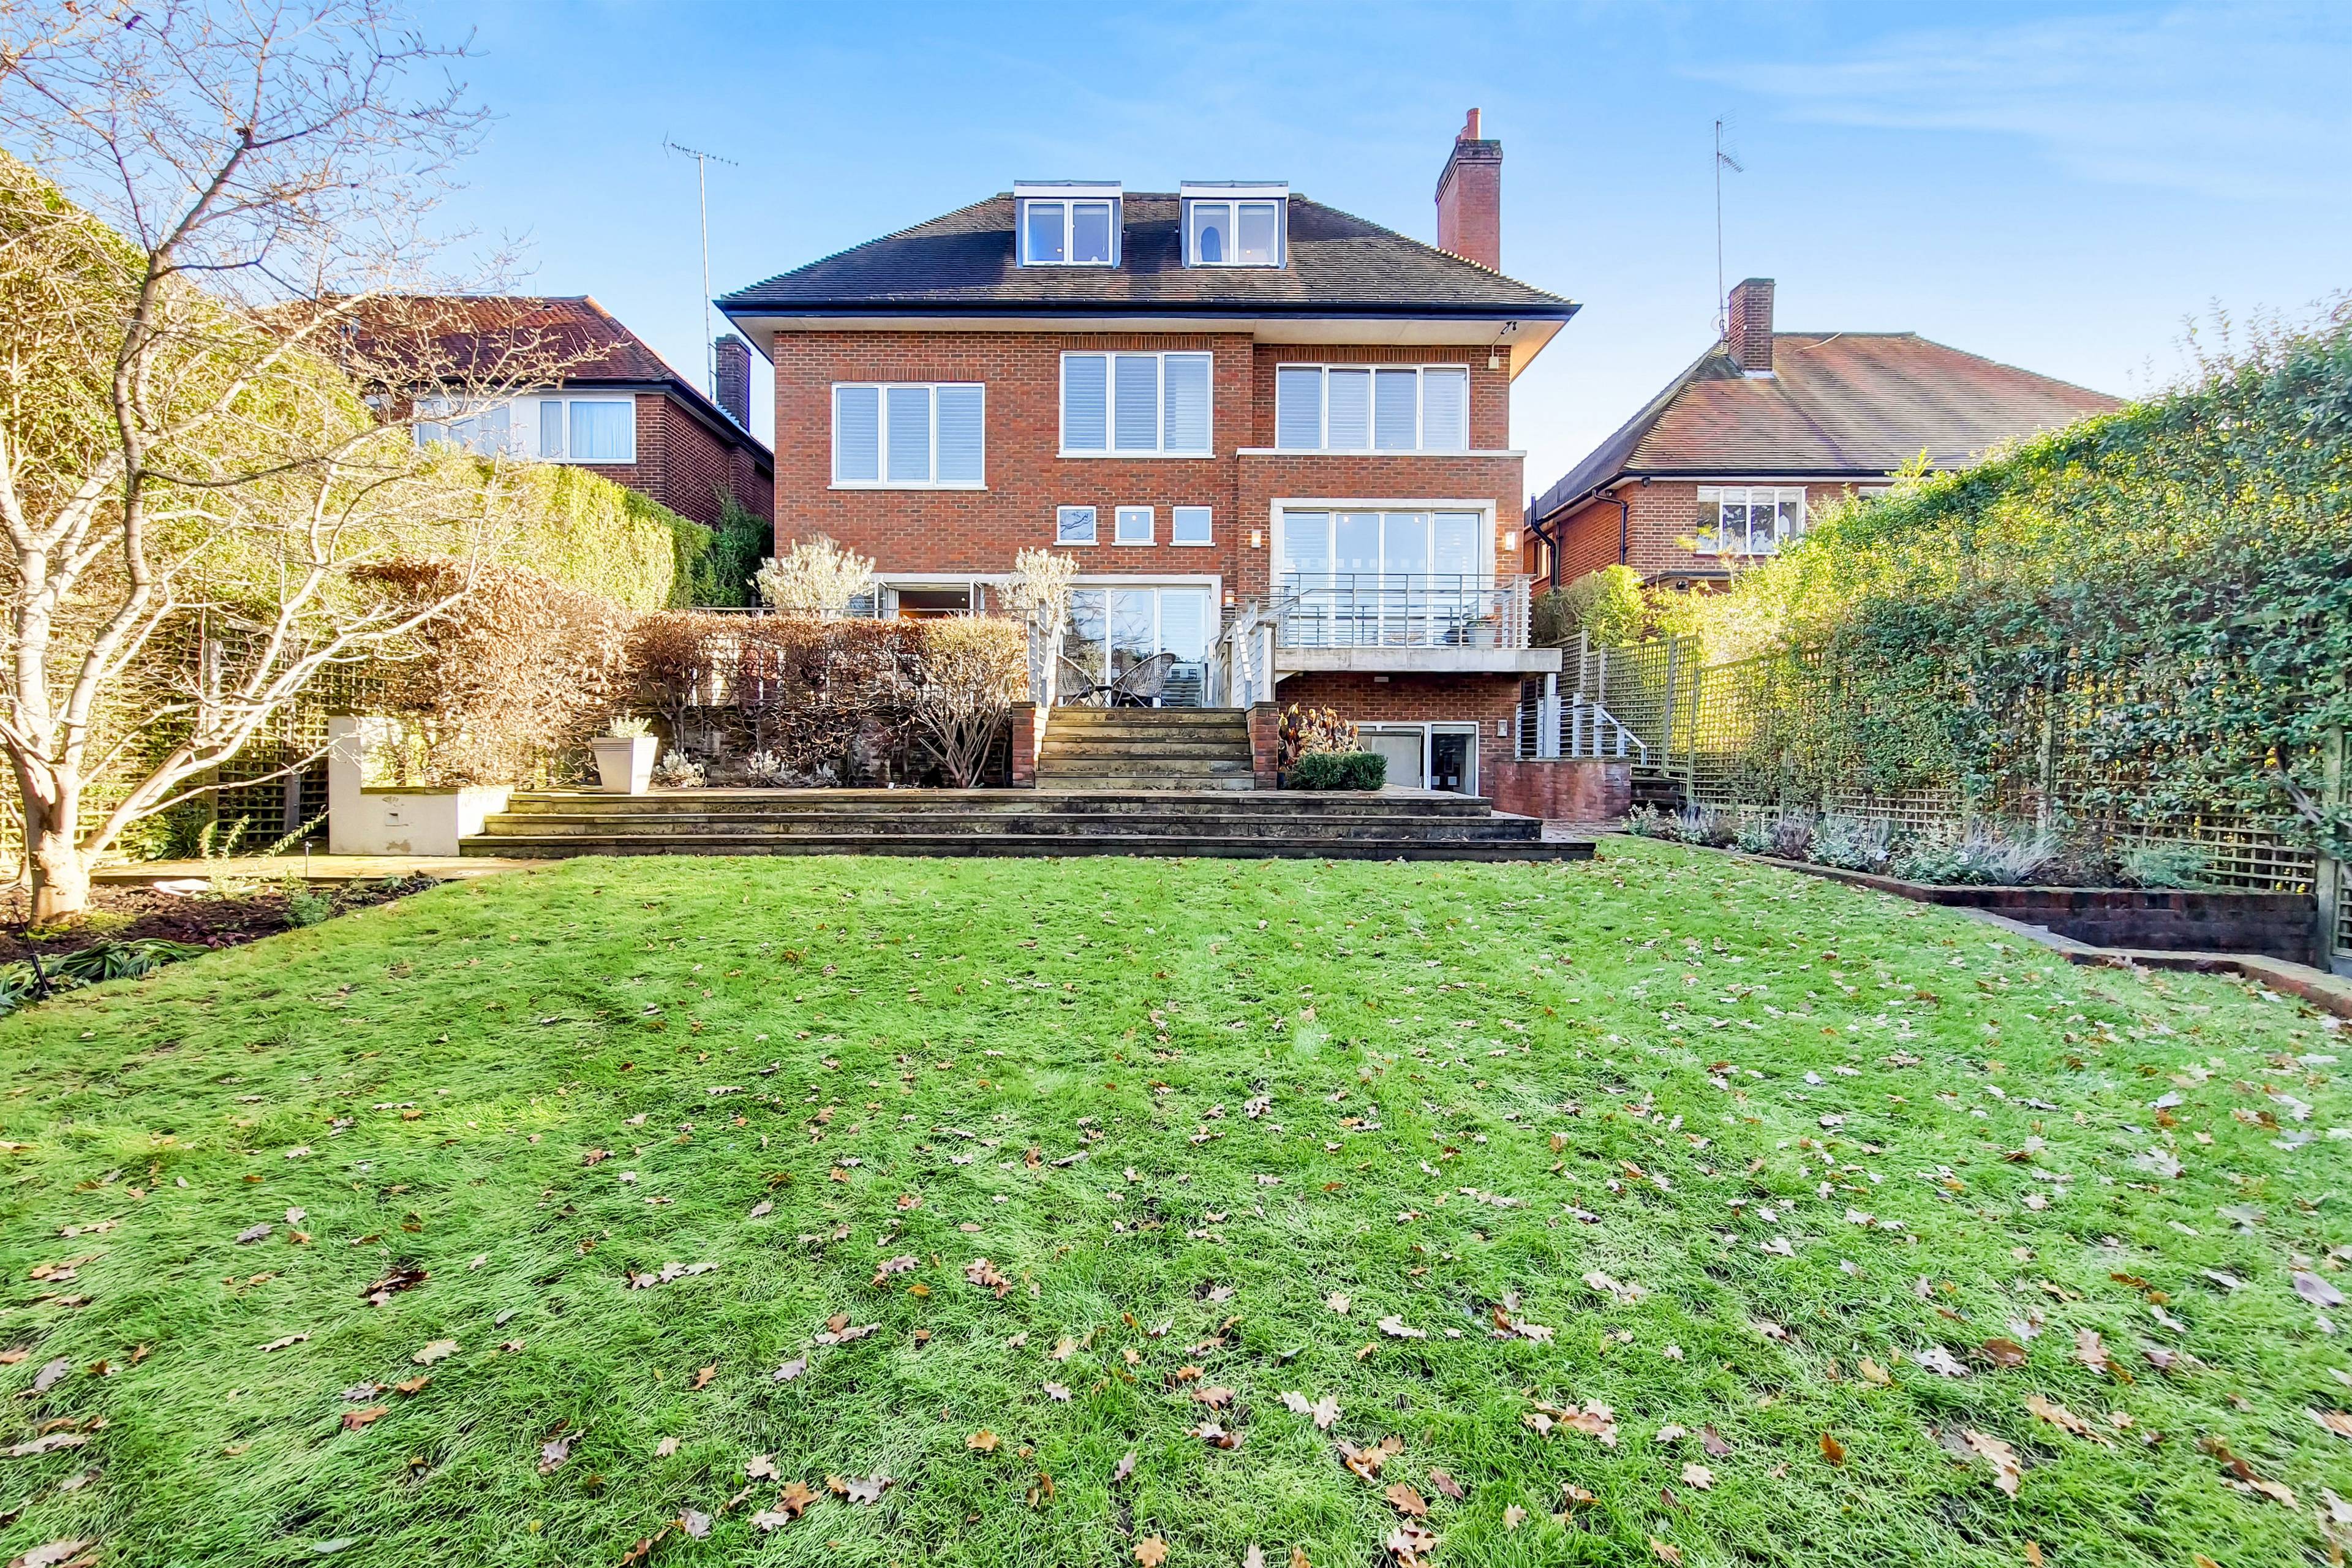 Fabulous Family Home at Hampstead Garden Suburb With Close Proximity to Both Highgate and Hampstead Golf Courses